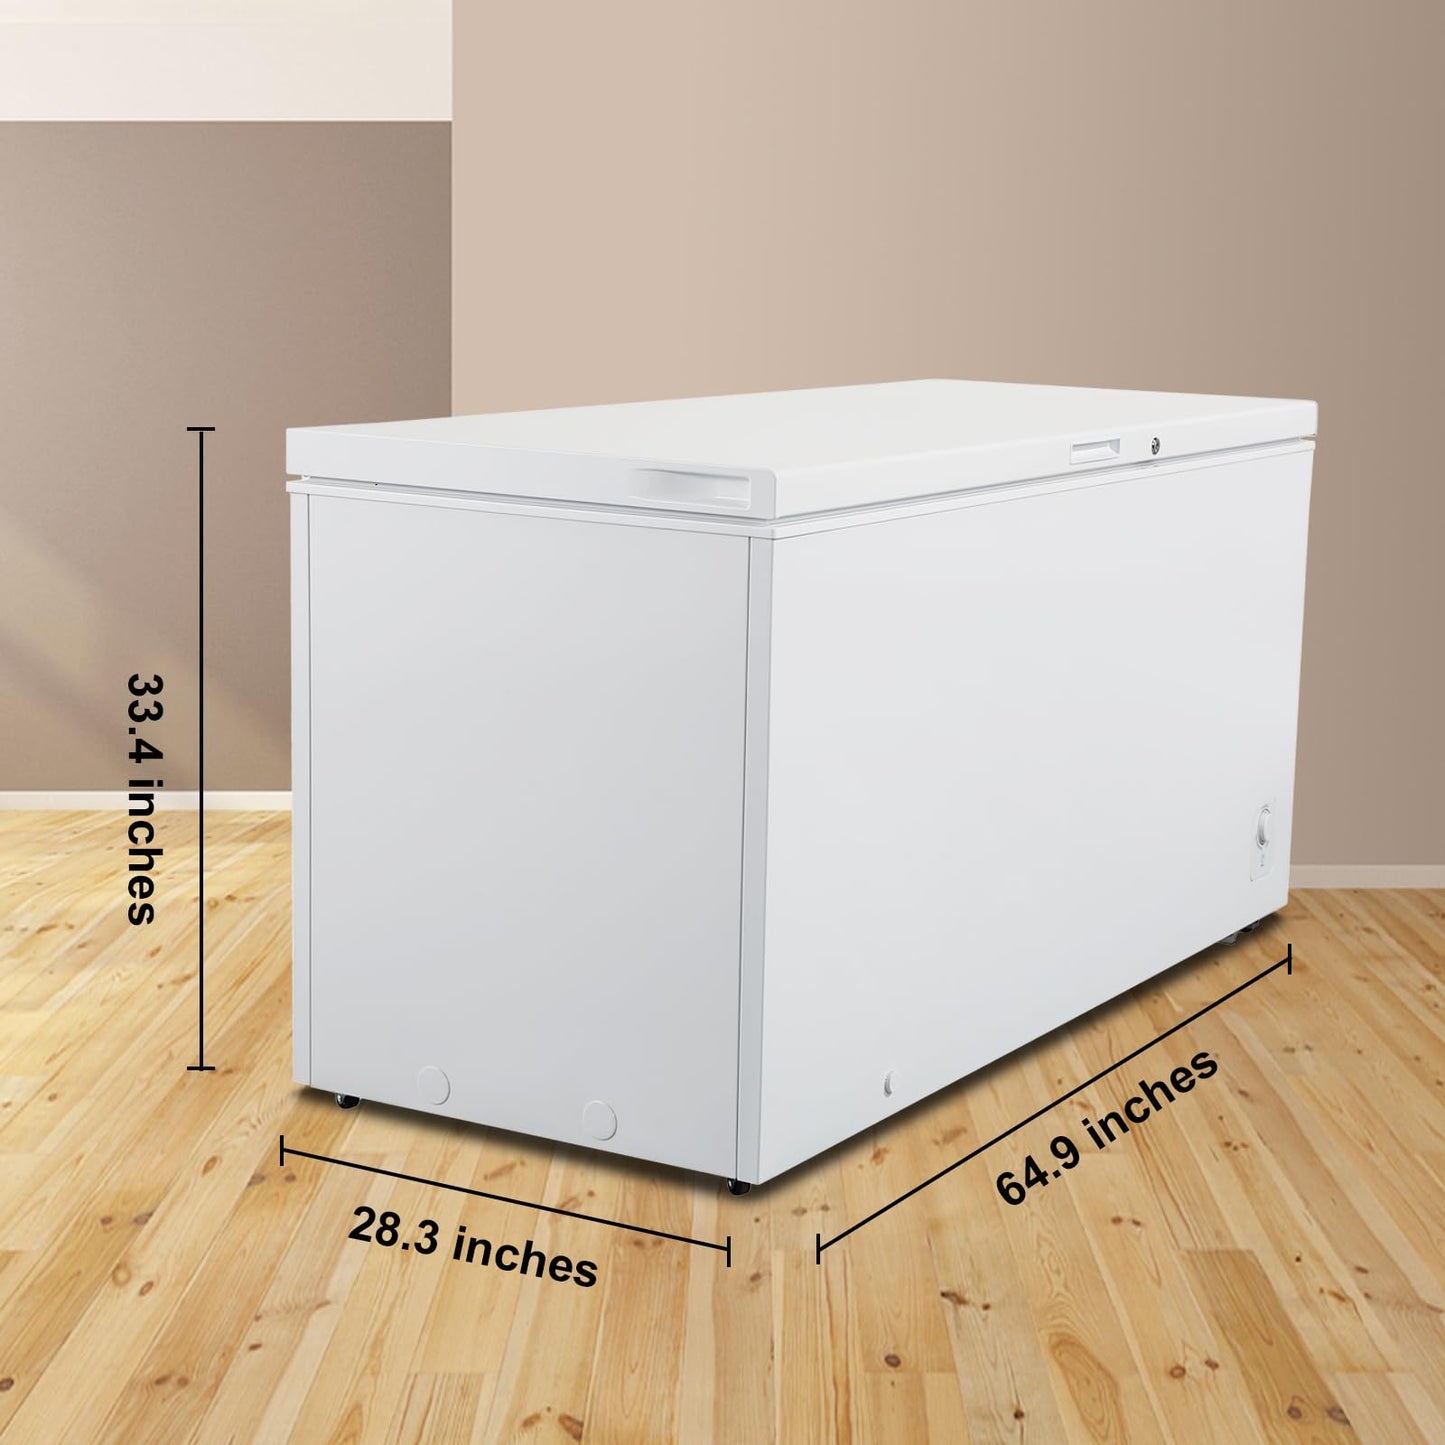 Techomey Chest Freezer 17.7 Cu.Ft Deep Freezer, Compact Freezer with Adjustable Thermostat Control and Removable Wire Basket, Top Open Door, 4 Universal Wheels, Lock, White